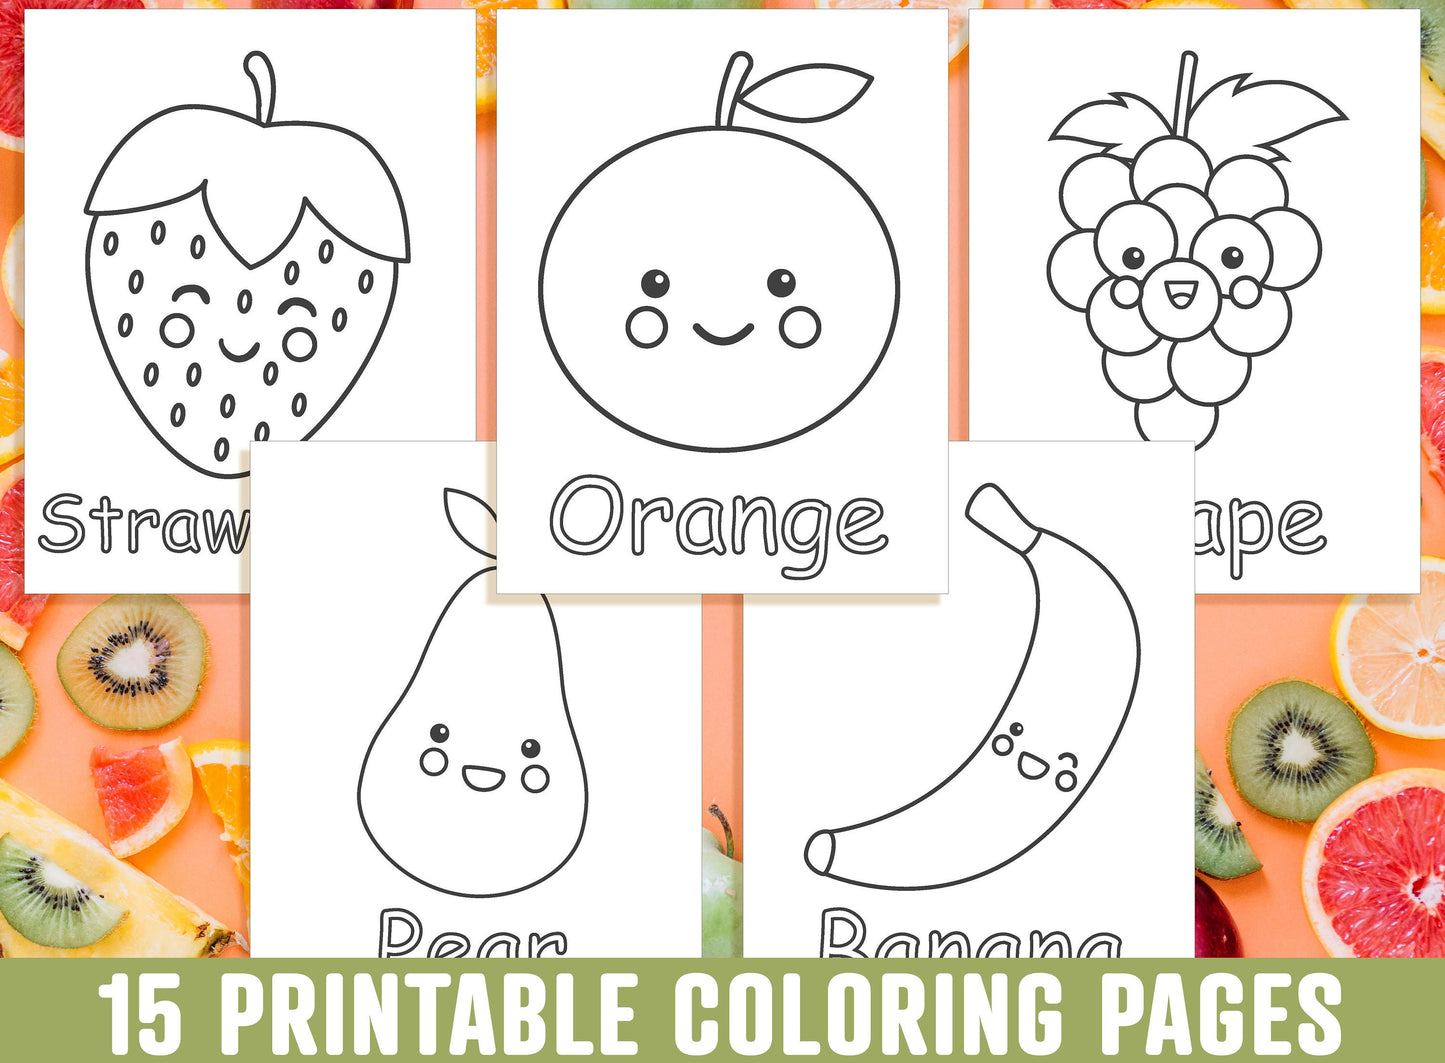 Fruit Coloring Pages, Fruit Coloring Book for Kids, Boys, Girls, Teen, Printable Activity Sheets, Fruit Coloring Worksheet, Instant Download